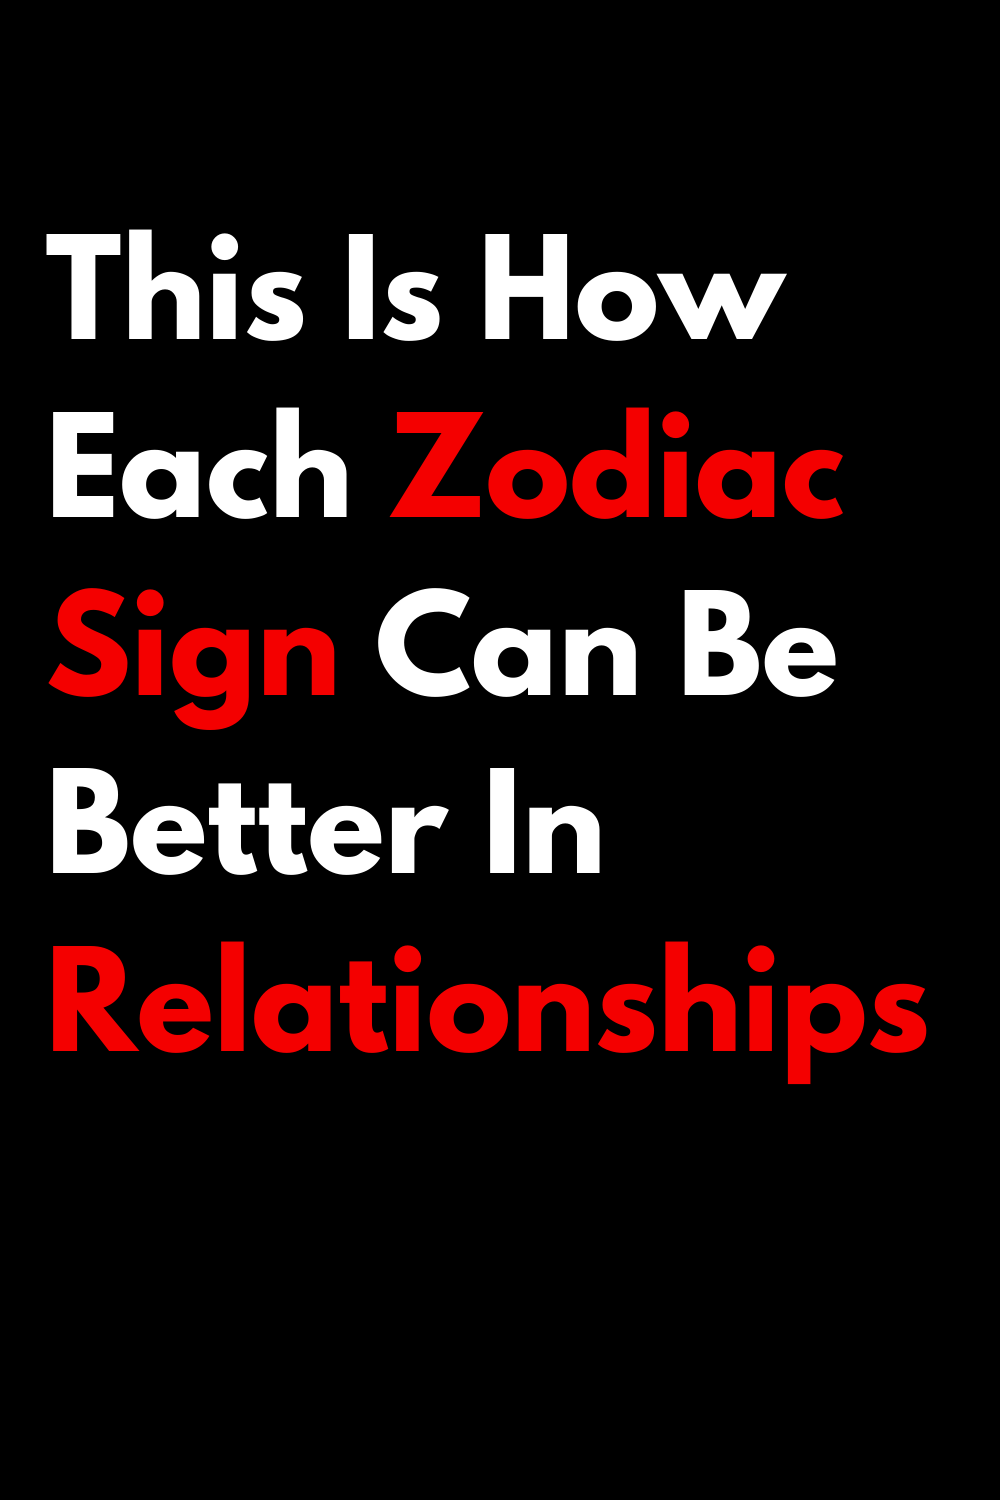 This Is How Each Zodiac Sign Can Be Better In Relationships